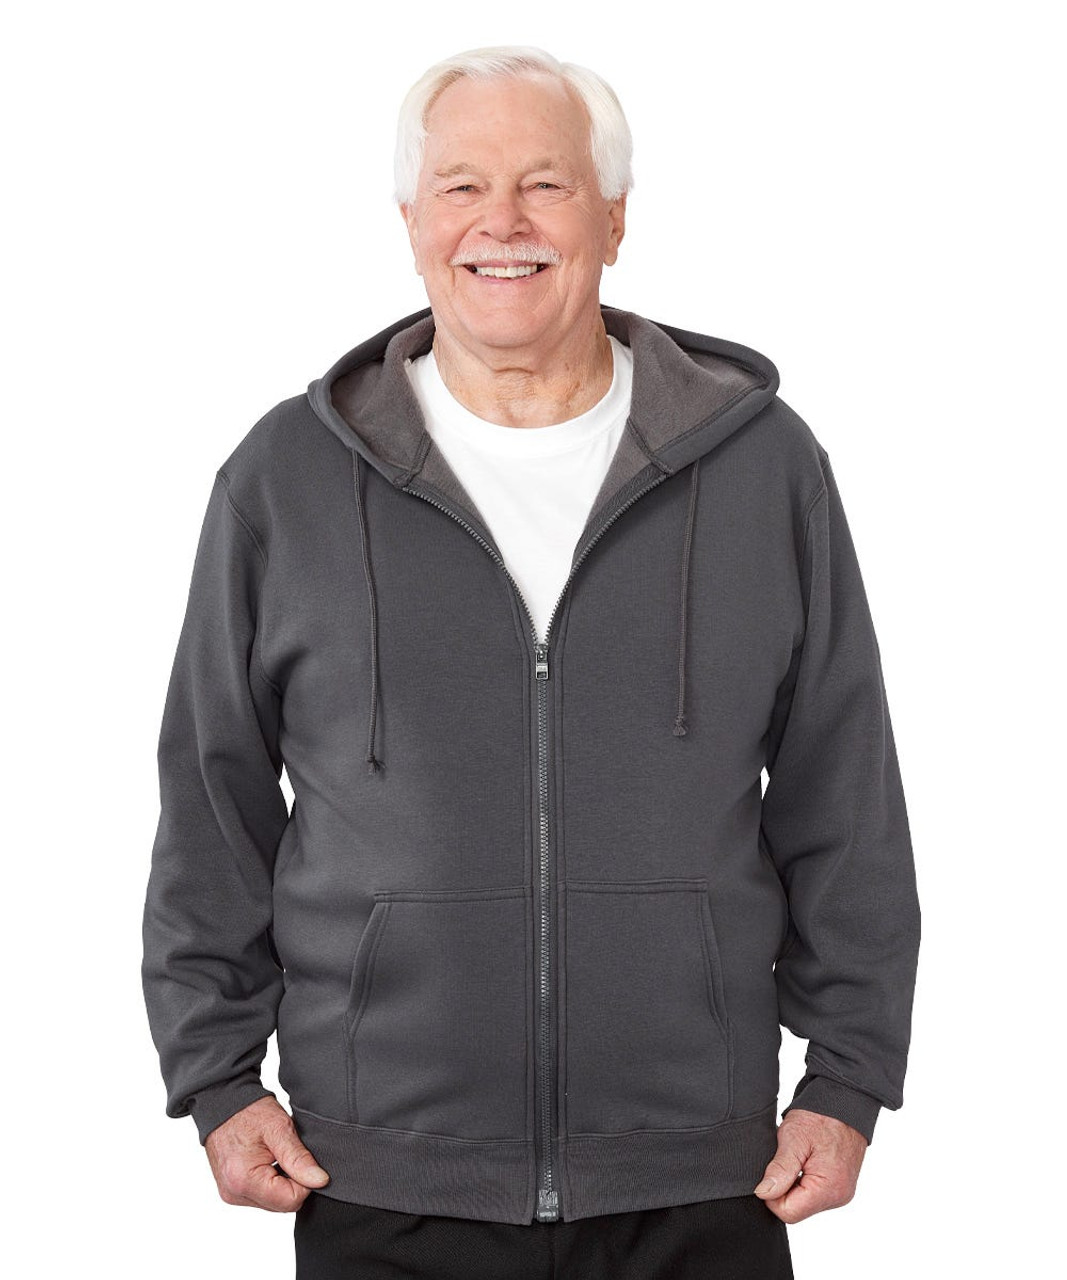 Silverts SV40010 Mens Magnetic-Zipper Hoodie with Pockets Gray, Size=L, SV40010-SV1115-L